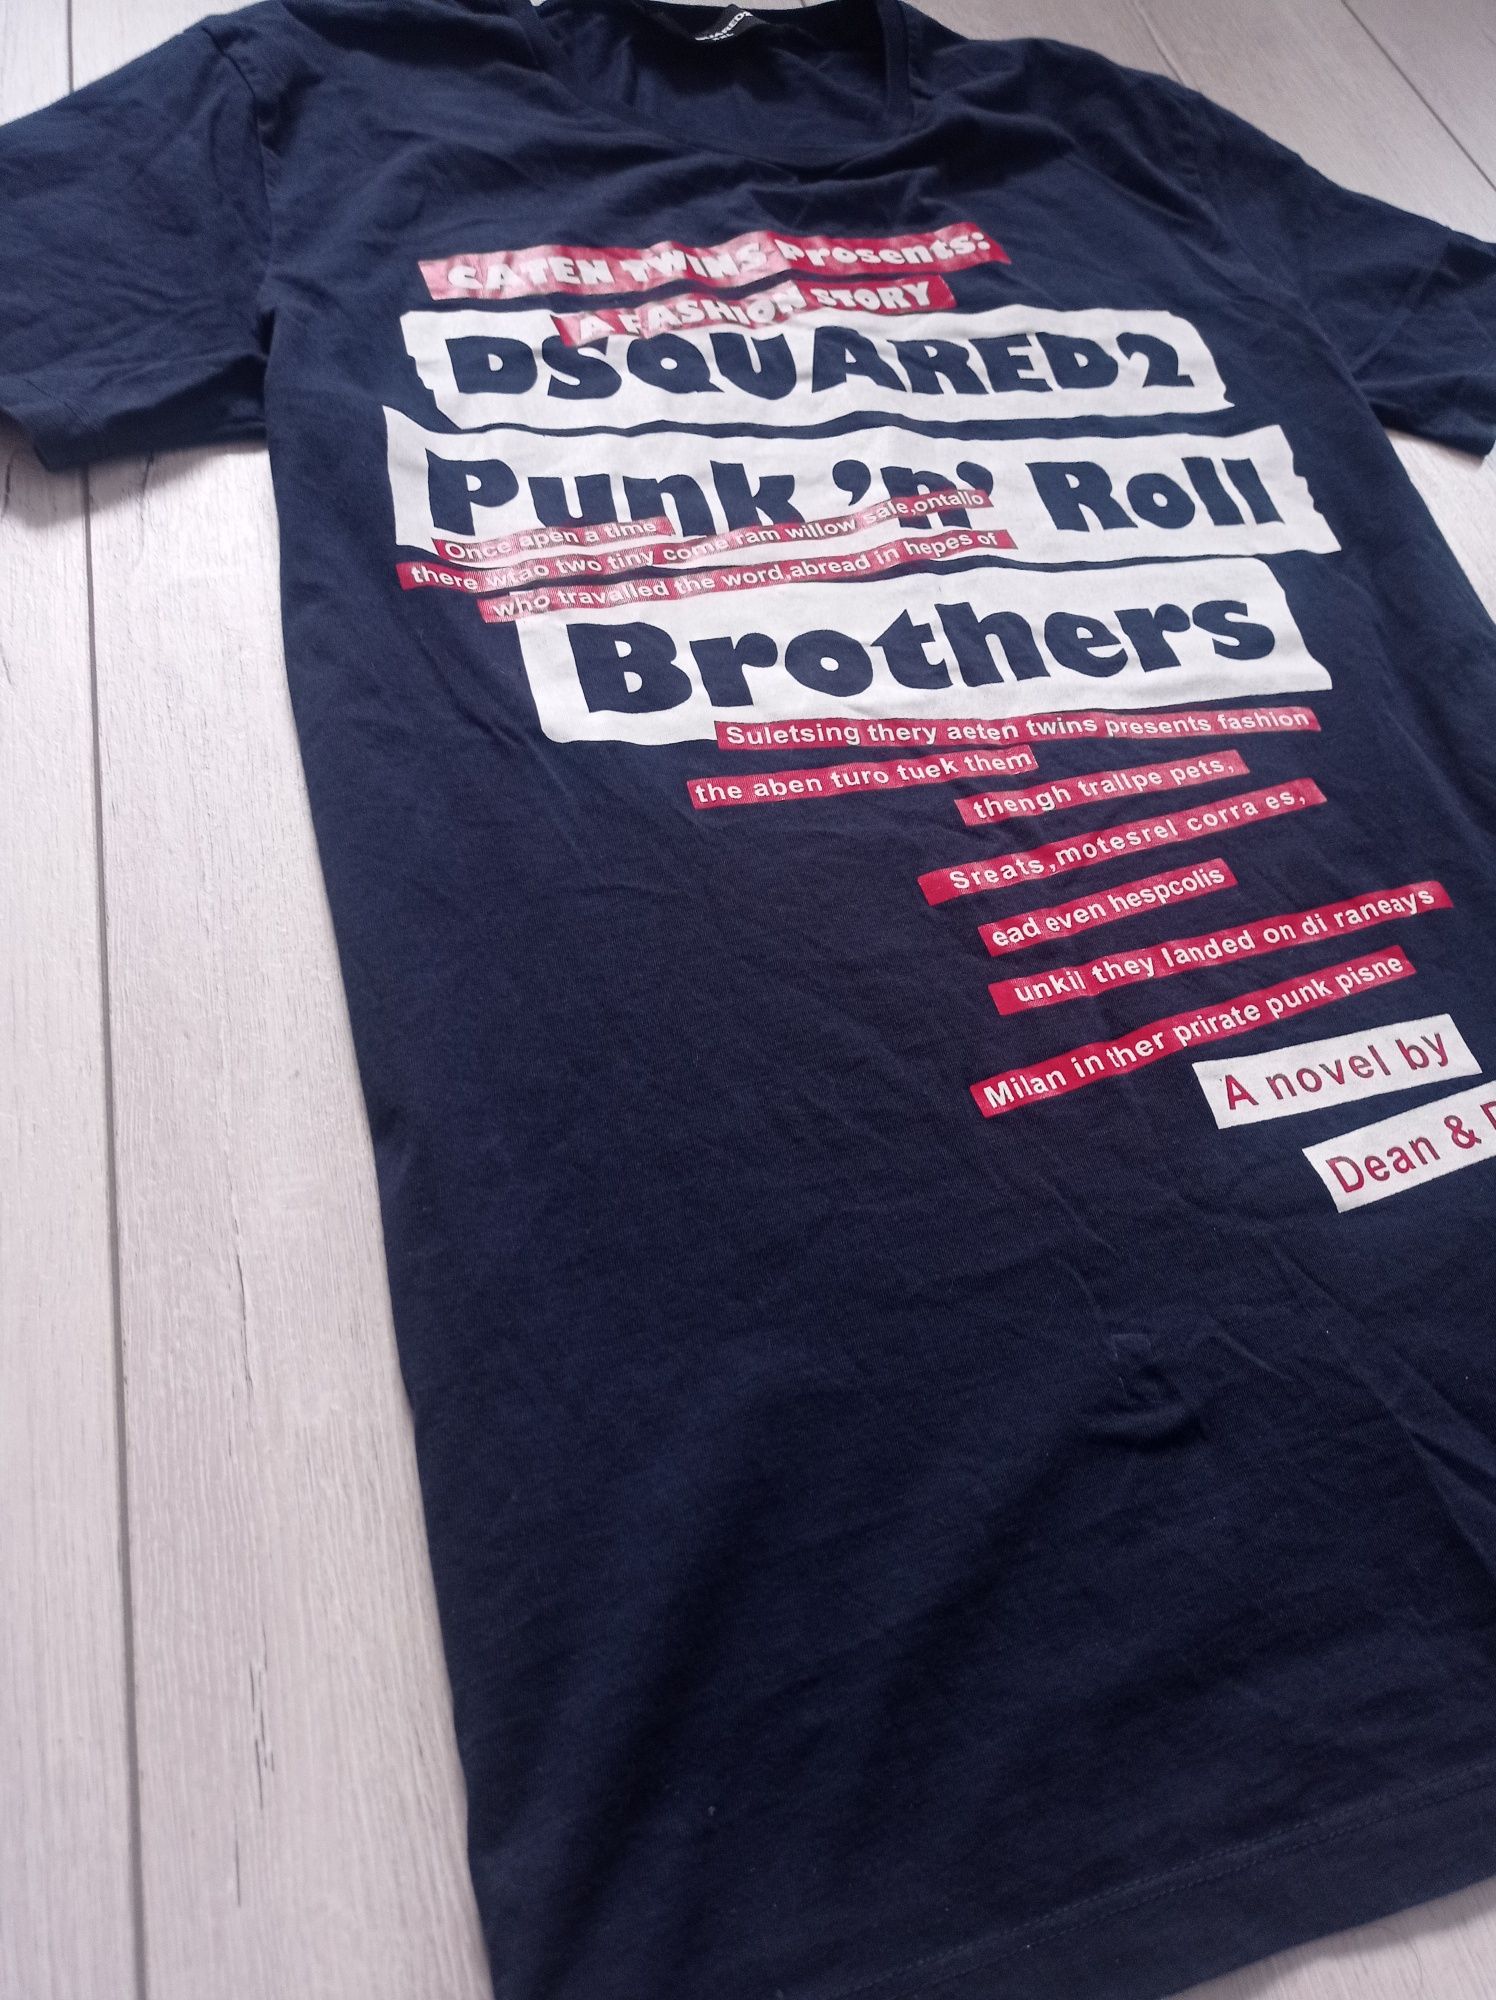 T shirt Dsquared Punk n Roll XL made in Italy